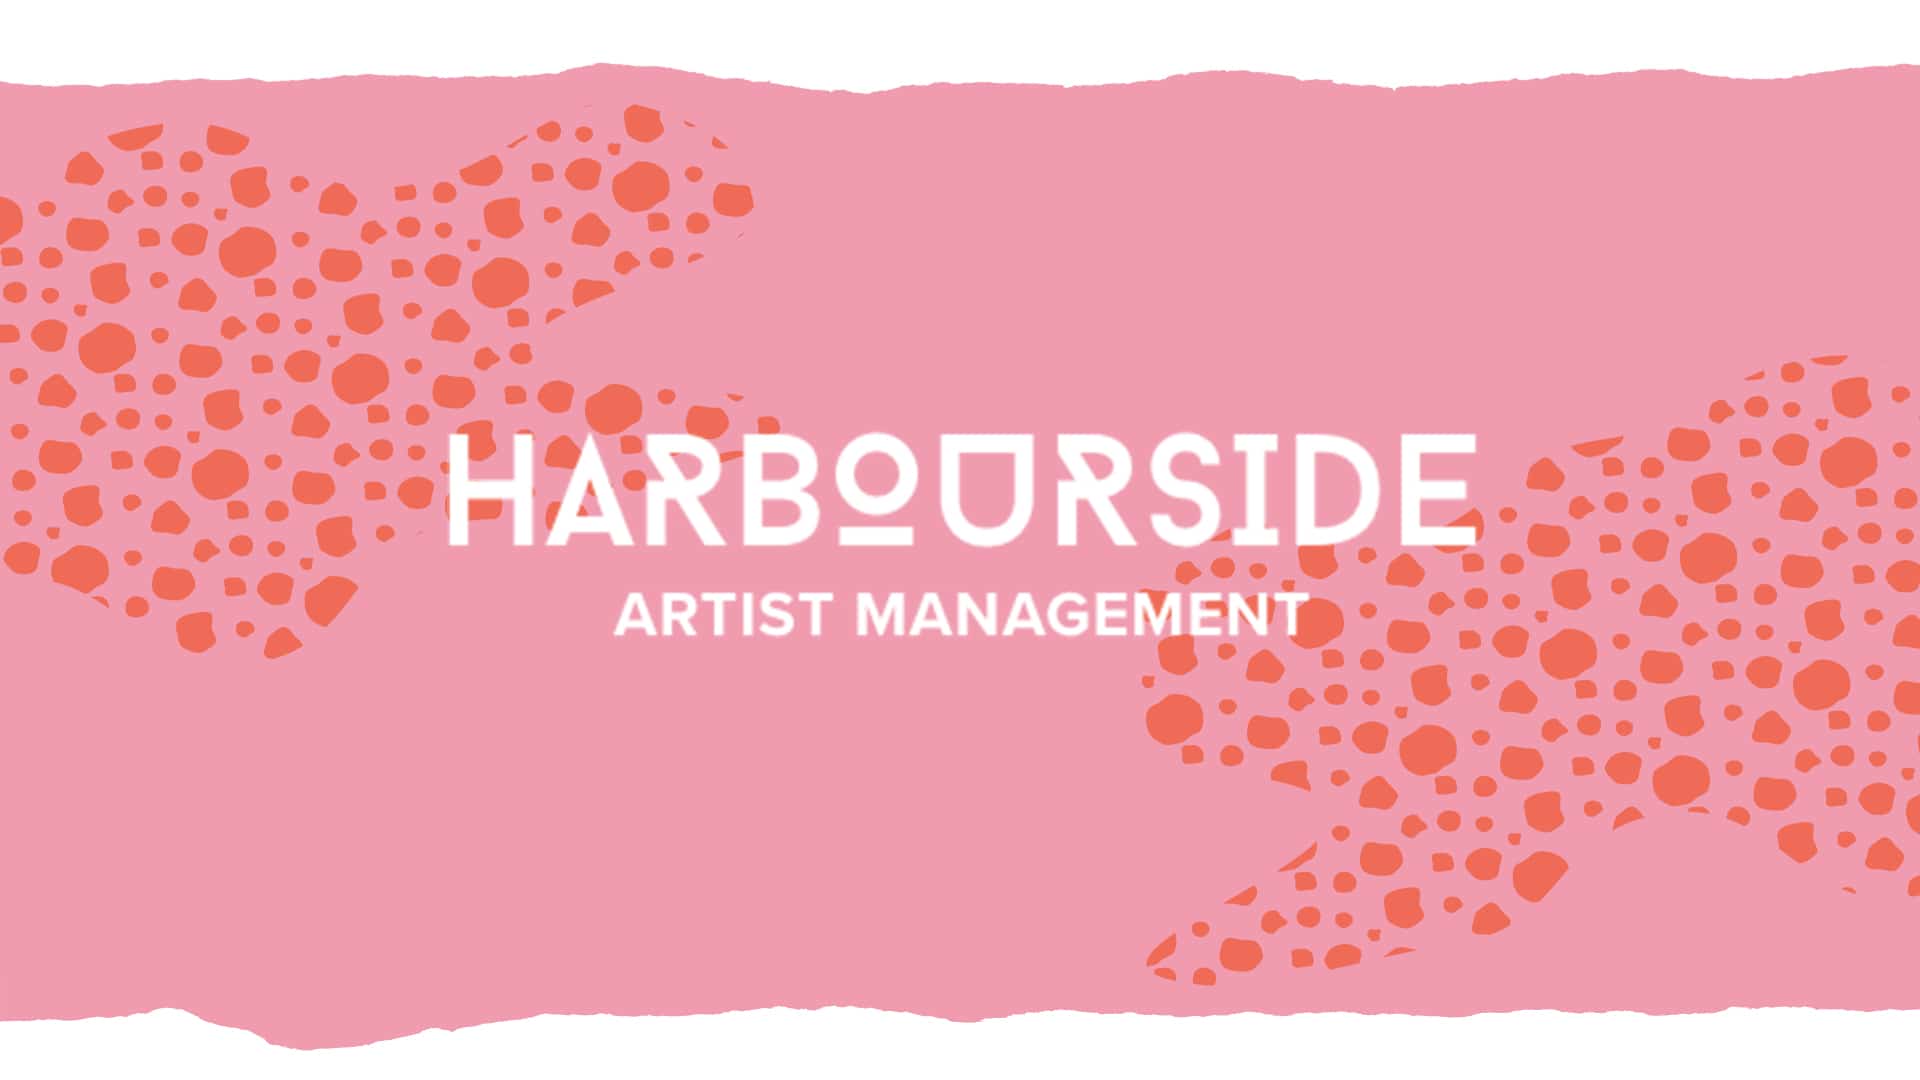 Harbourside artist management cover image with pink patterned background and white logo